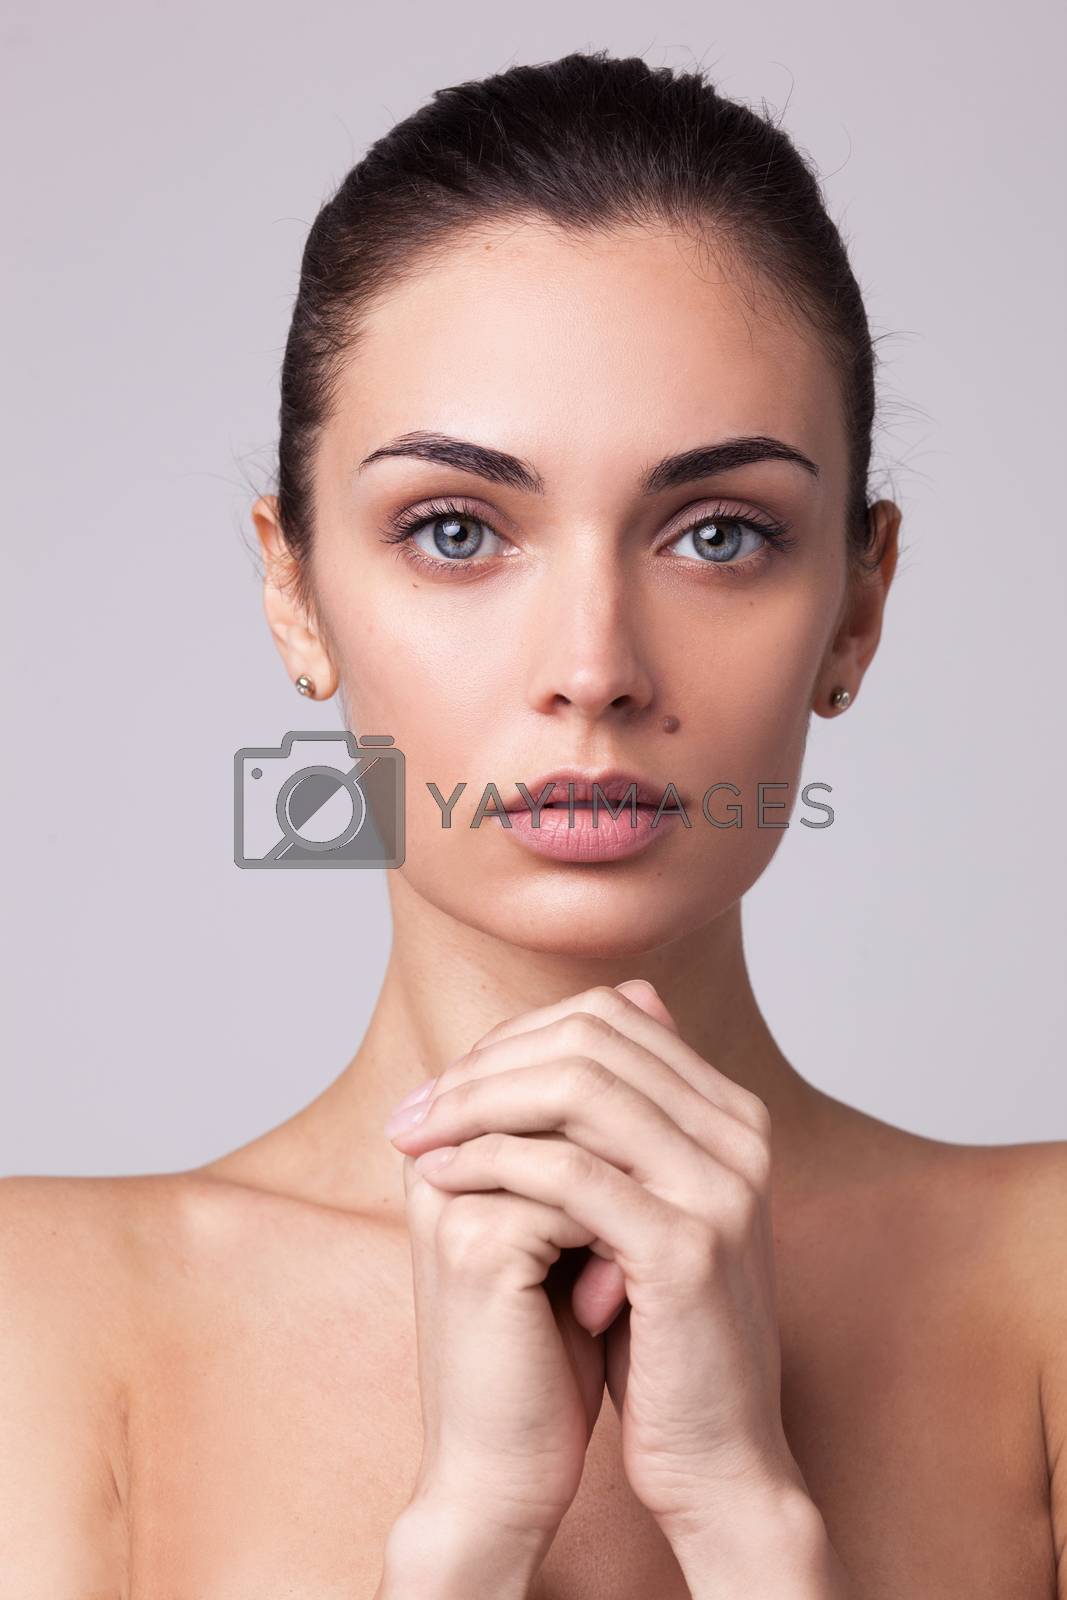 Royalty free image of closeup portrait of beautyful woman with clean fresh skin by doodko